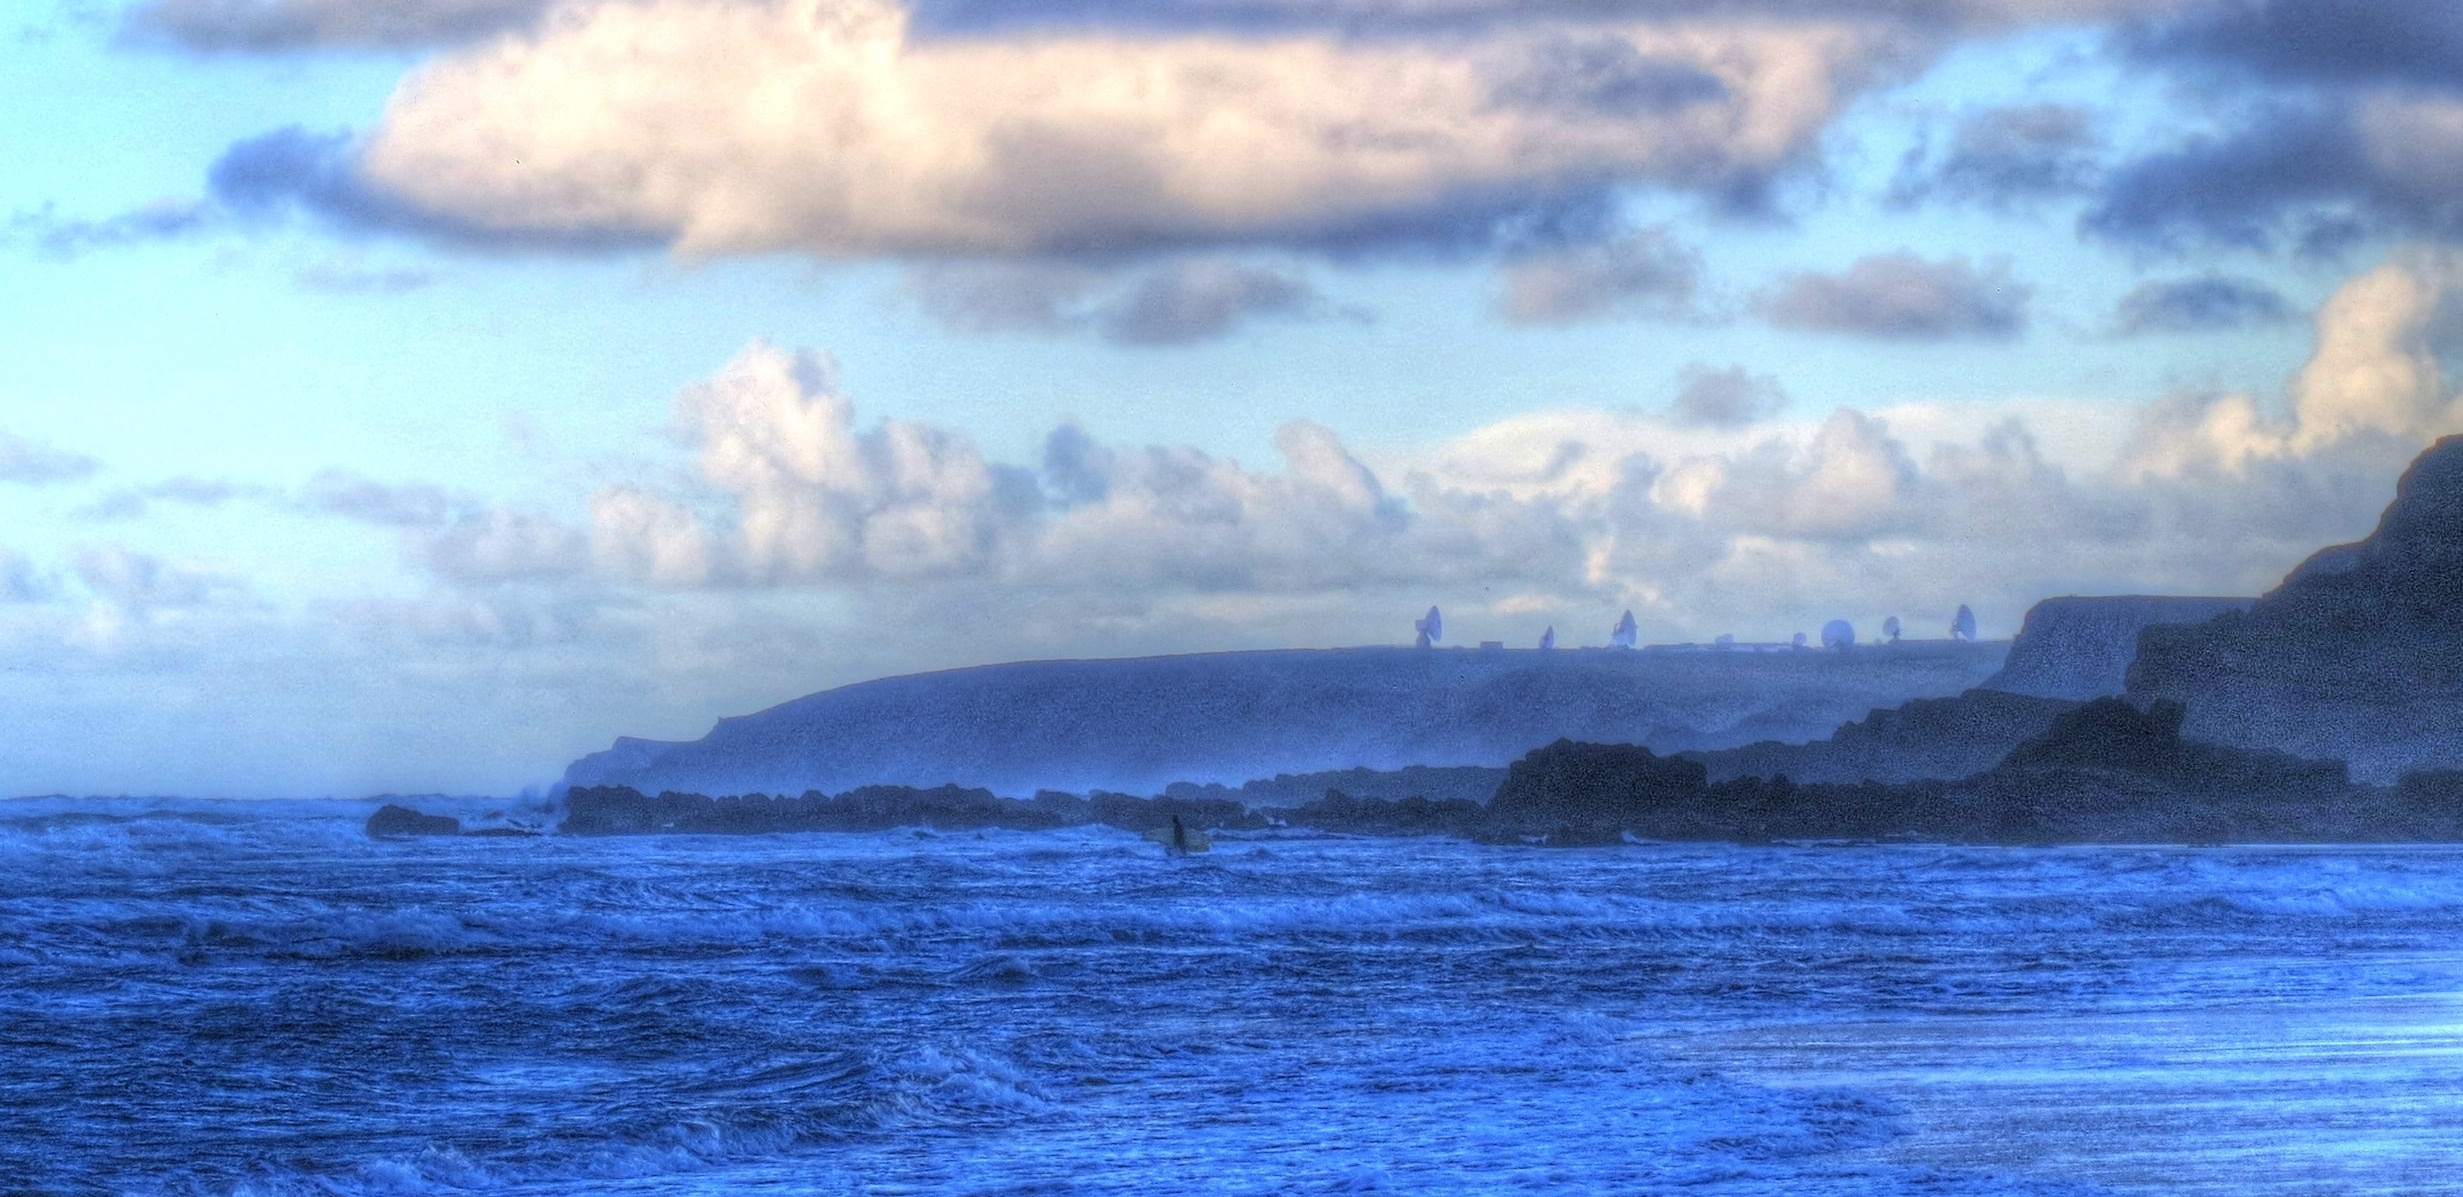 This photograph was taken from Widemouth Bay beach, showing a surfer going into the see there. In the background can be seen the dishes of GCHQ Bude.